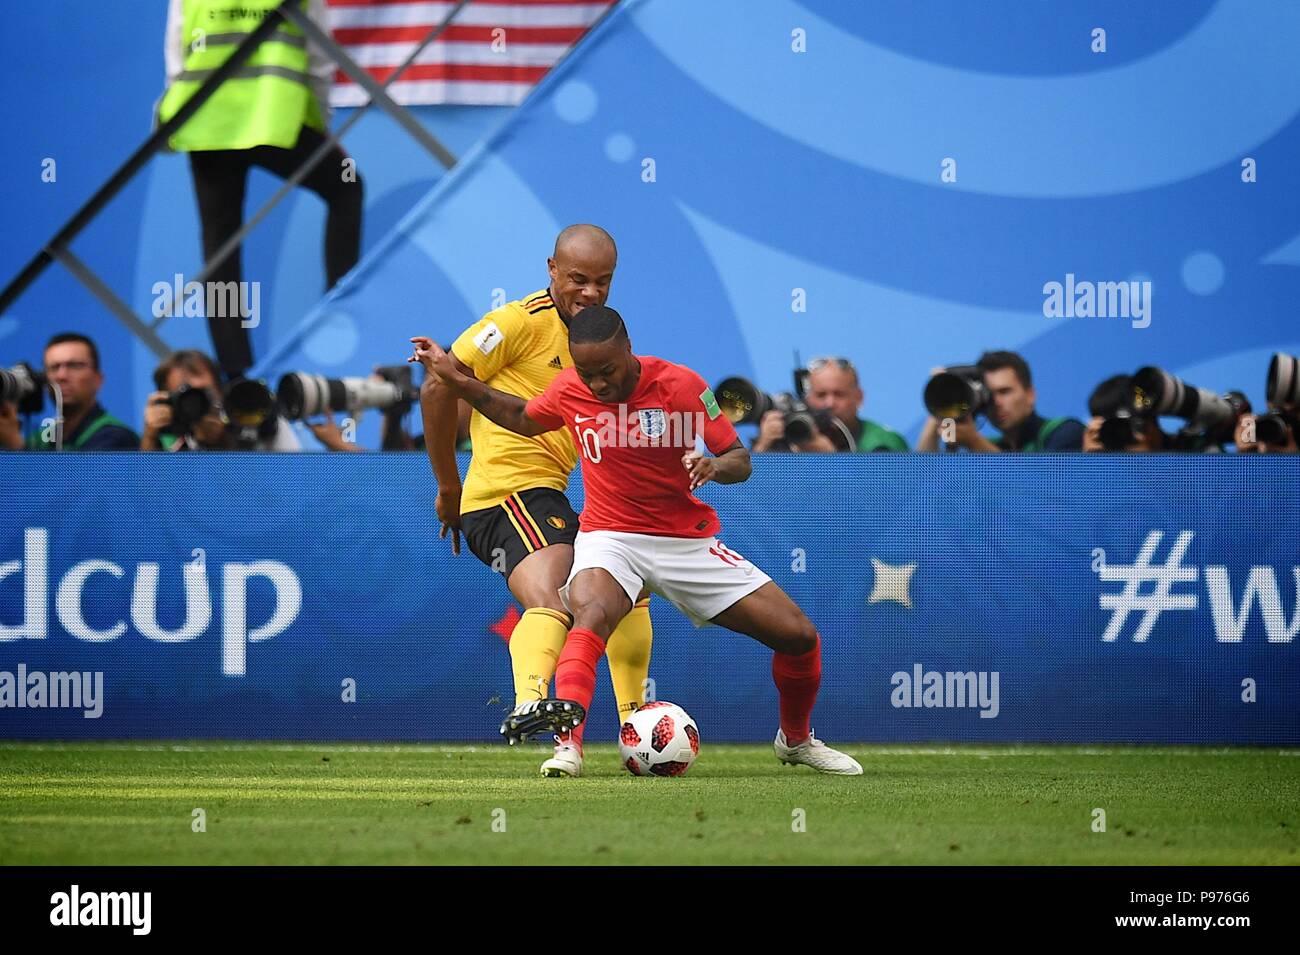 July 14th, 2018, St, Petersburg, Russia. Raheem Sterling(10) of England and  Vincent Company of Belgium compete for the ball during the 2018 FIFA World Cup Russia match between England and Belgium at Saint-Petersburg Stadium, Russia. Shoja Lak/Alamy Live News Stock Photo